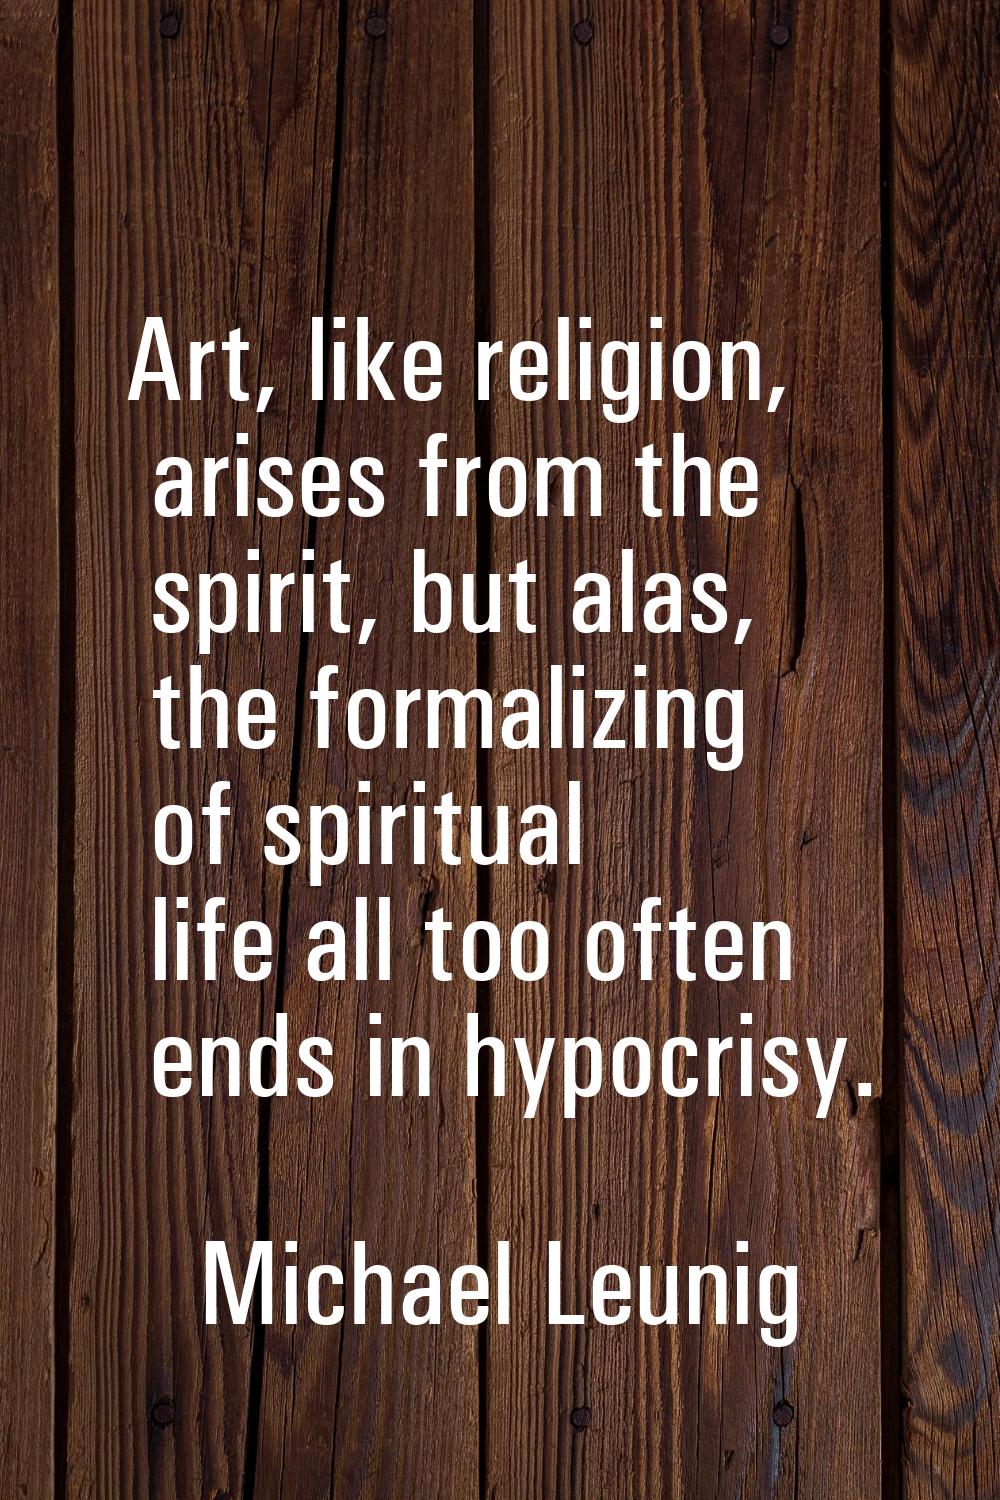 Art, like religion, arises from the spirit, but alas, the formalizing of spiritual life all too oft